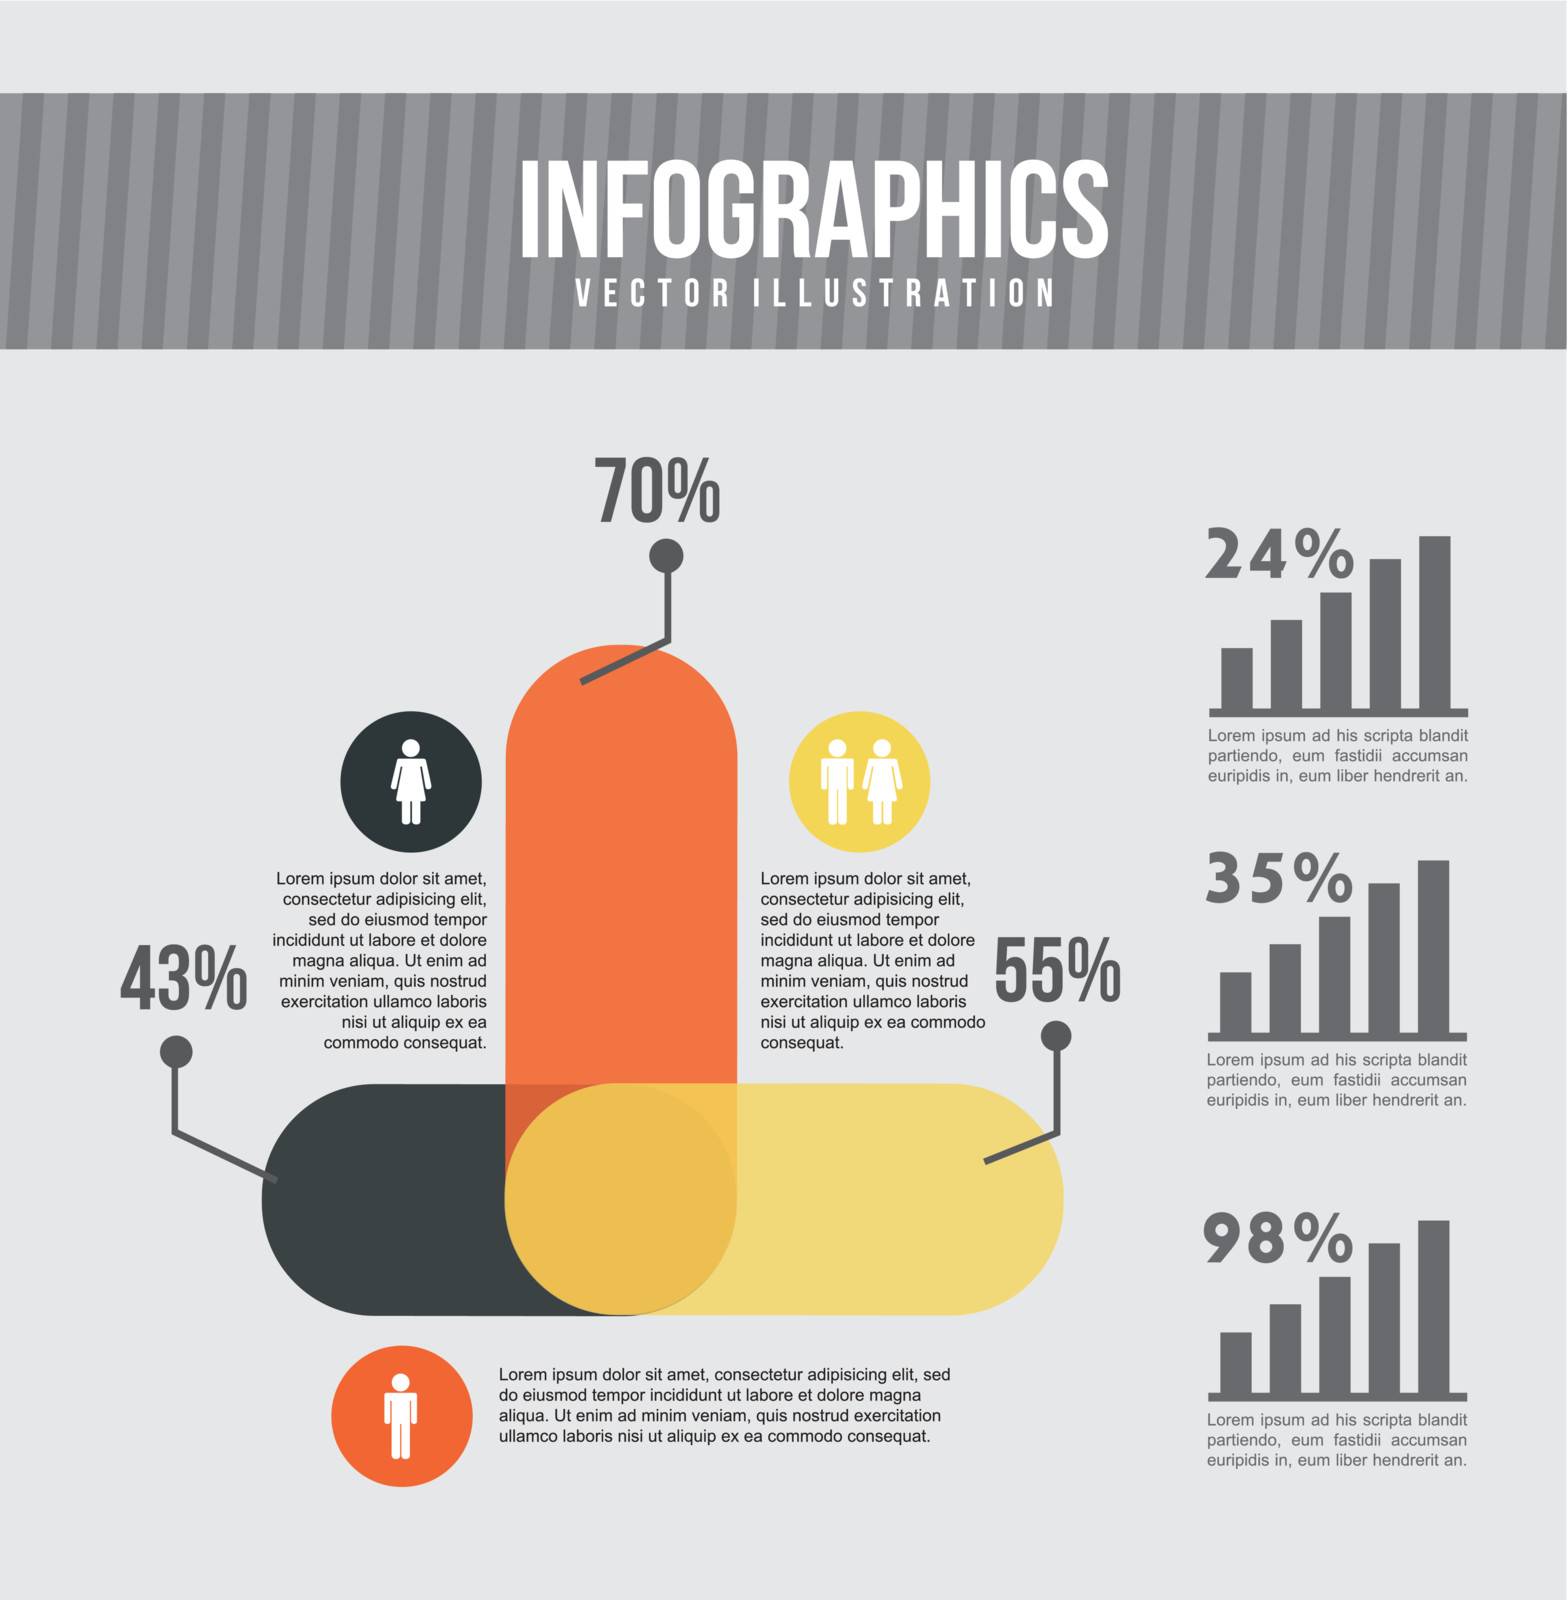 infographics with graphs and bar, vintage. vector illustration